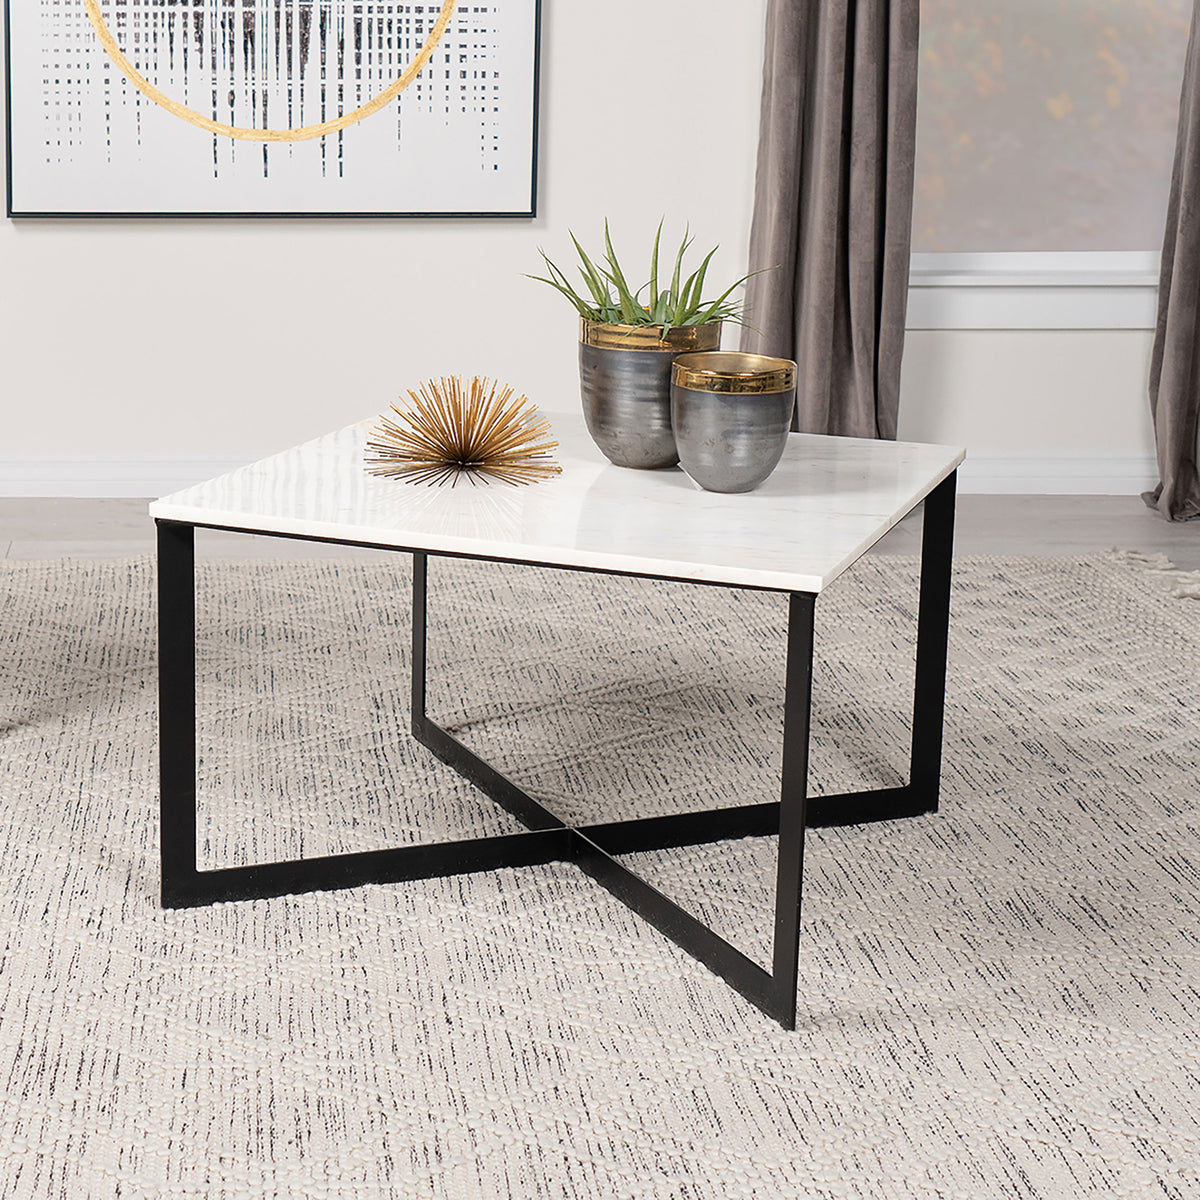 Tobin Square Marble Top Coffee Table White and Black Tobin Square Marble Top Coffee Table White and Black Half Price Furniture